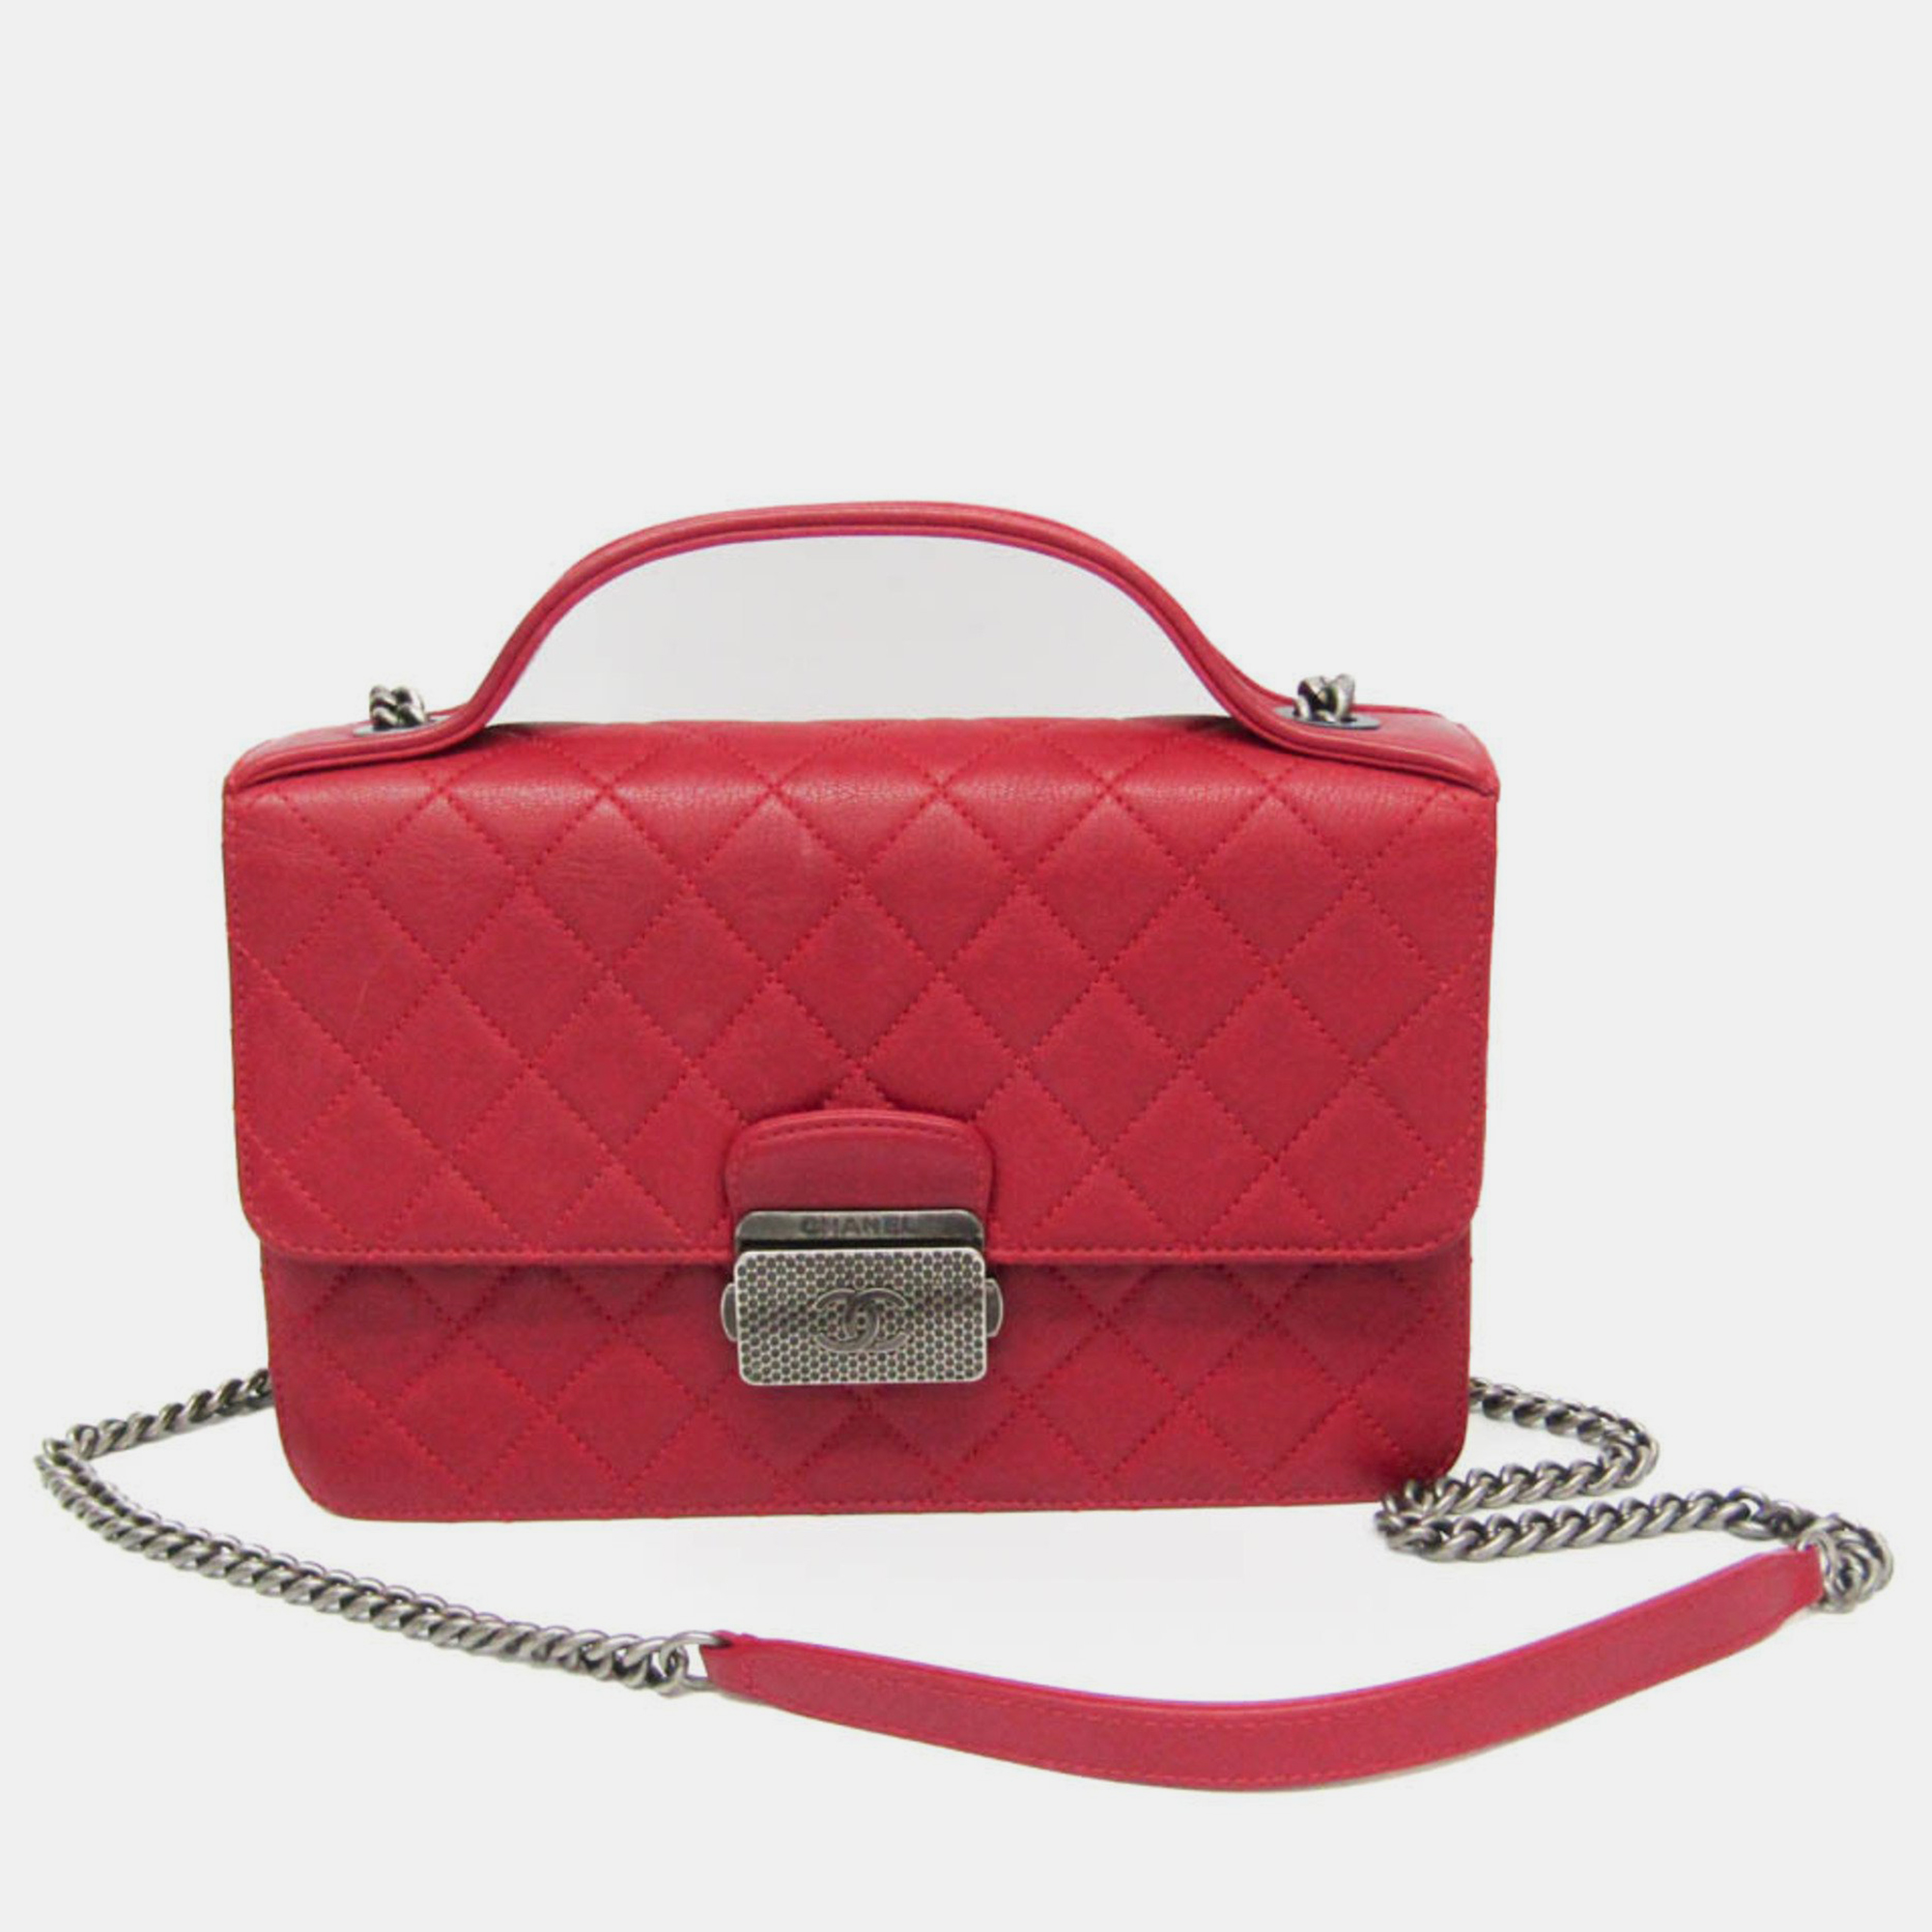 Chanel red quilted goatskin medium cc university flap bag